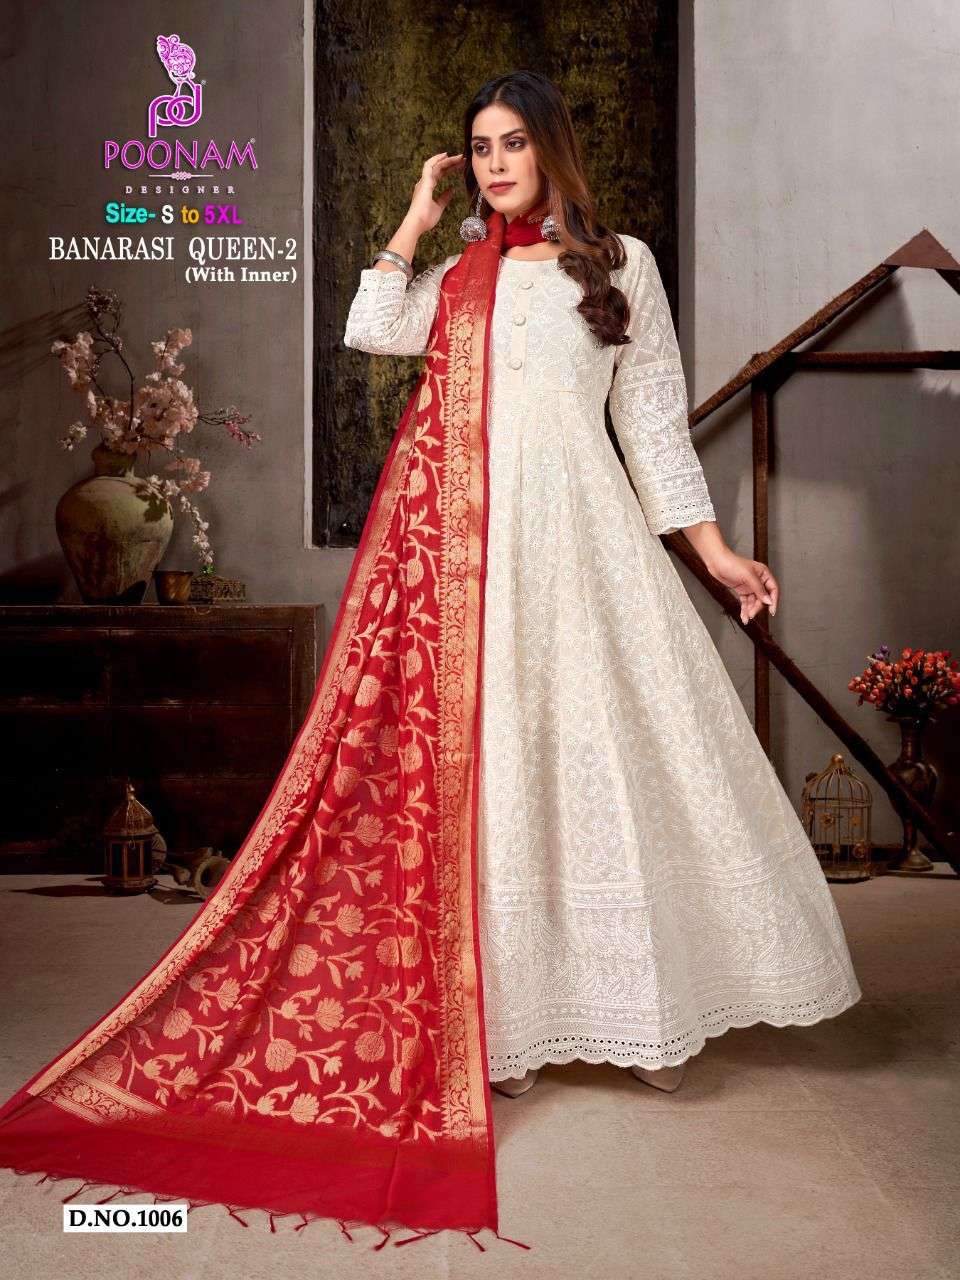 BANARASI QUEEN VOL-2 BY POONAM DESIGNER 1001 TO 1006 SERIES BEAUTIFUL STYLISH FANCY COLORFUL CASUAL WEAR & ETHNIC WEAR COTTON WITH WORK GOWNS WITH DUPATTA AT WHOLESALE PRICE